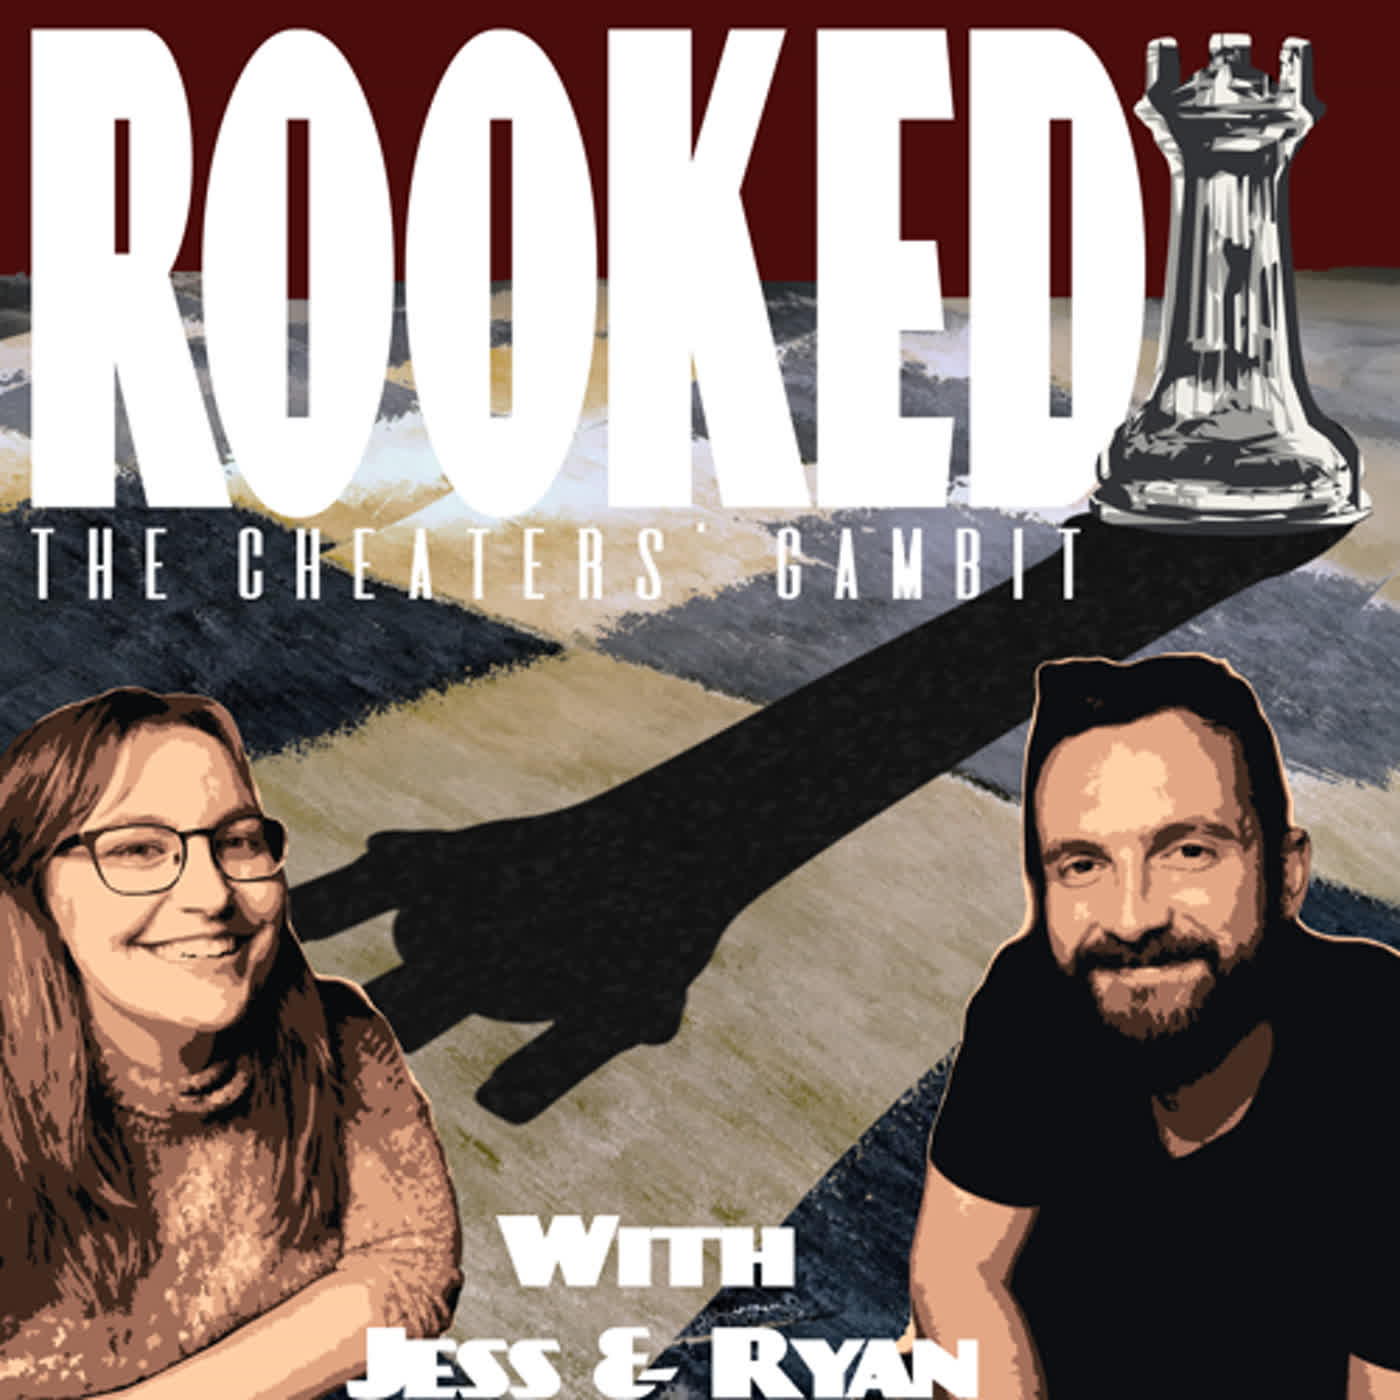 Rooked: The Cheaters' Gambit